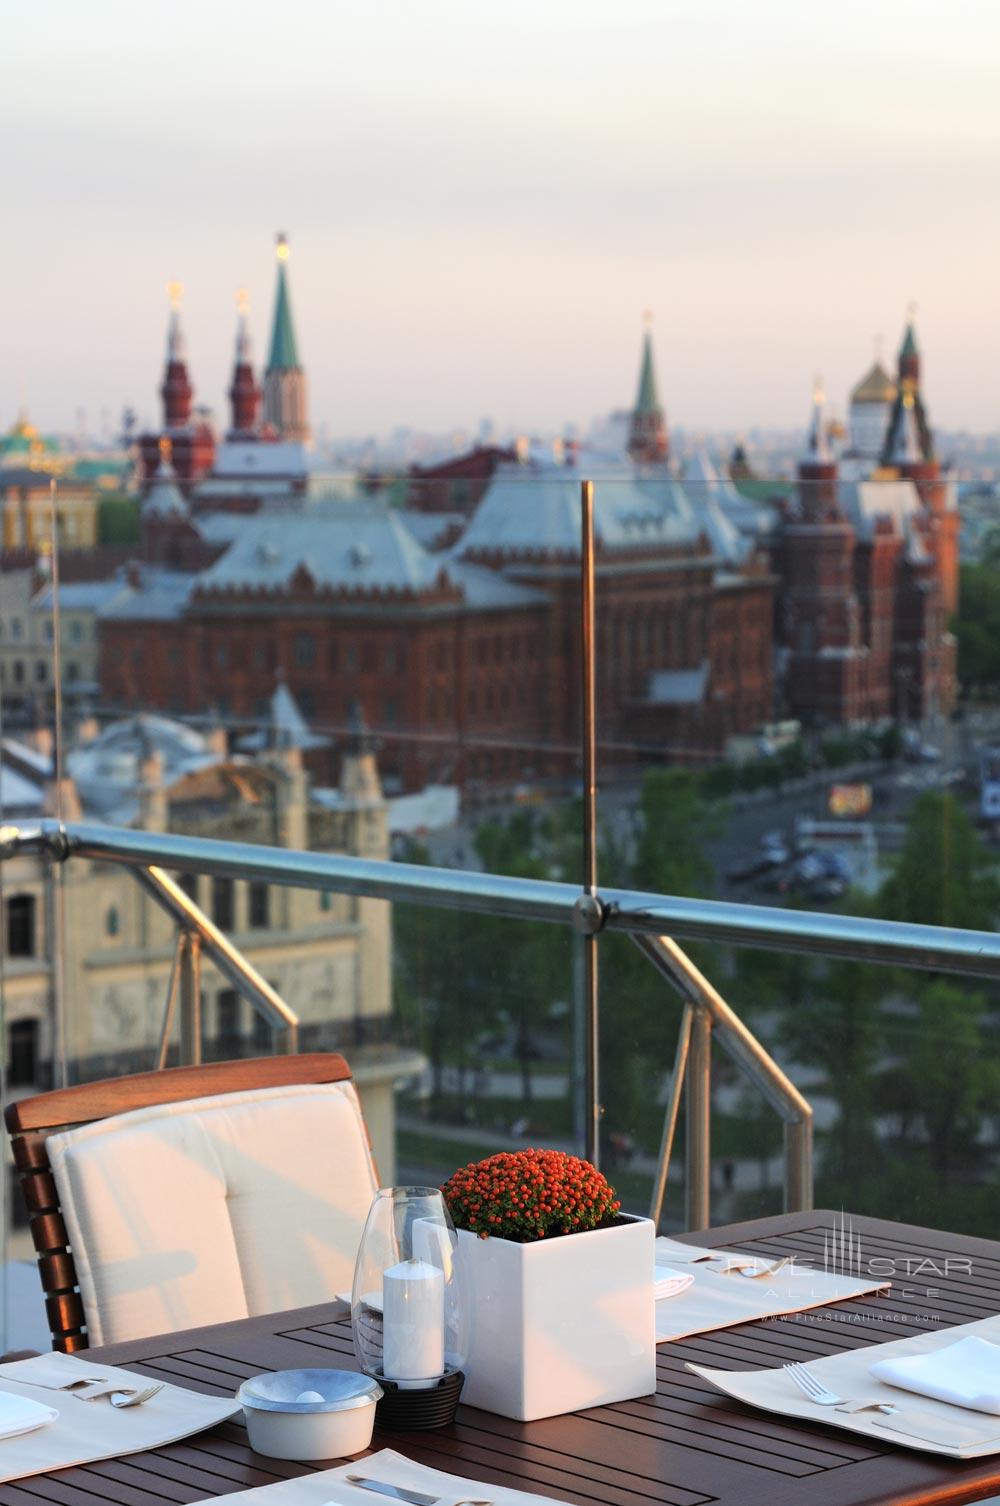 Conservatory Lounge Bar Terrace at Ararat Park Hyatt Moscow, Moscow, Russia